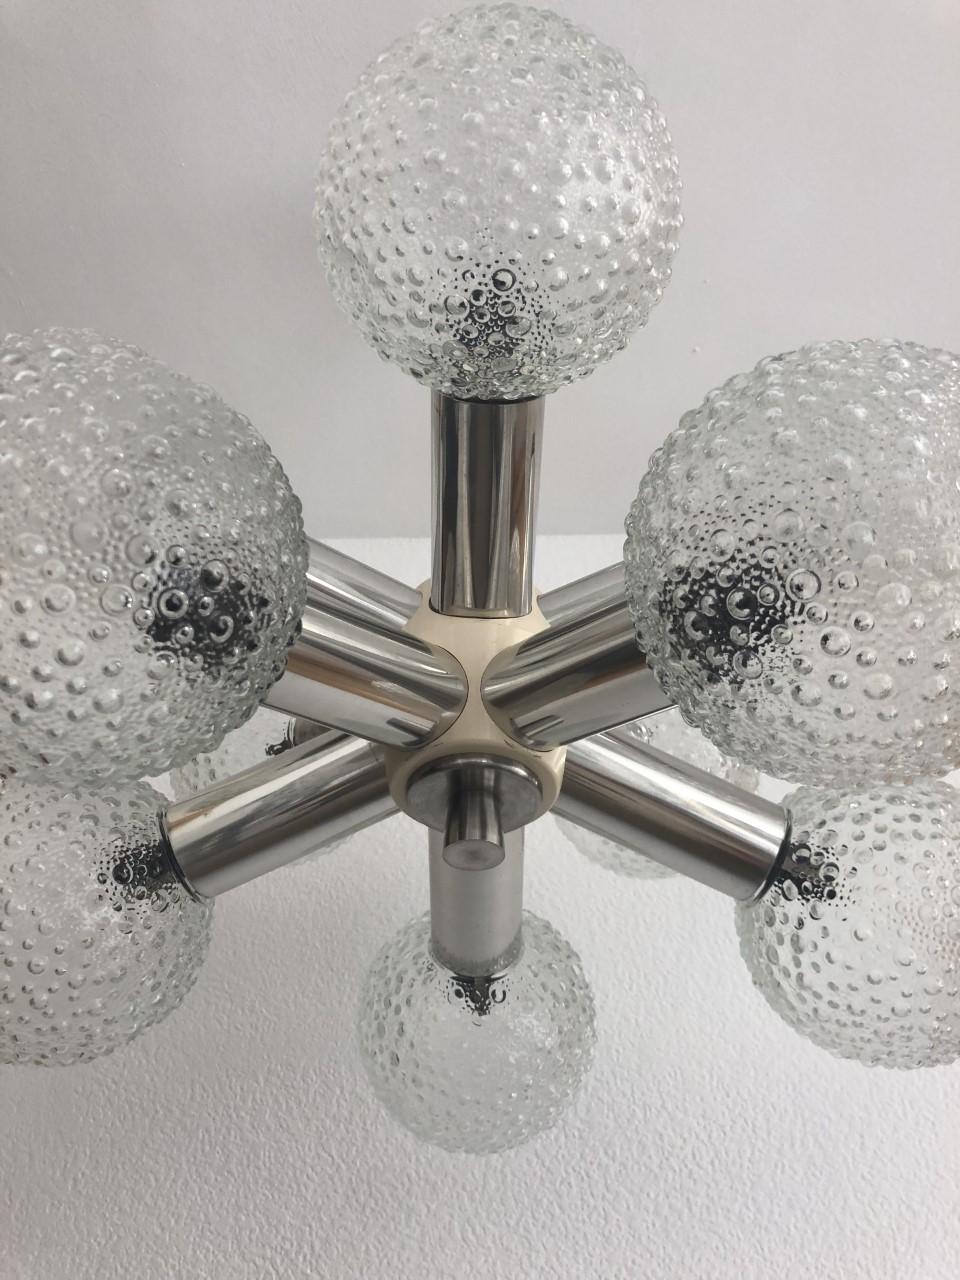 Marvelous and stunning German midcentury Sputnik chandelier. This chandelier was designed and manufactured during the 1970s in Germany.
This chandelier is composed by 10 units of clear glass balls and metal structure.
This chandelier is equipped